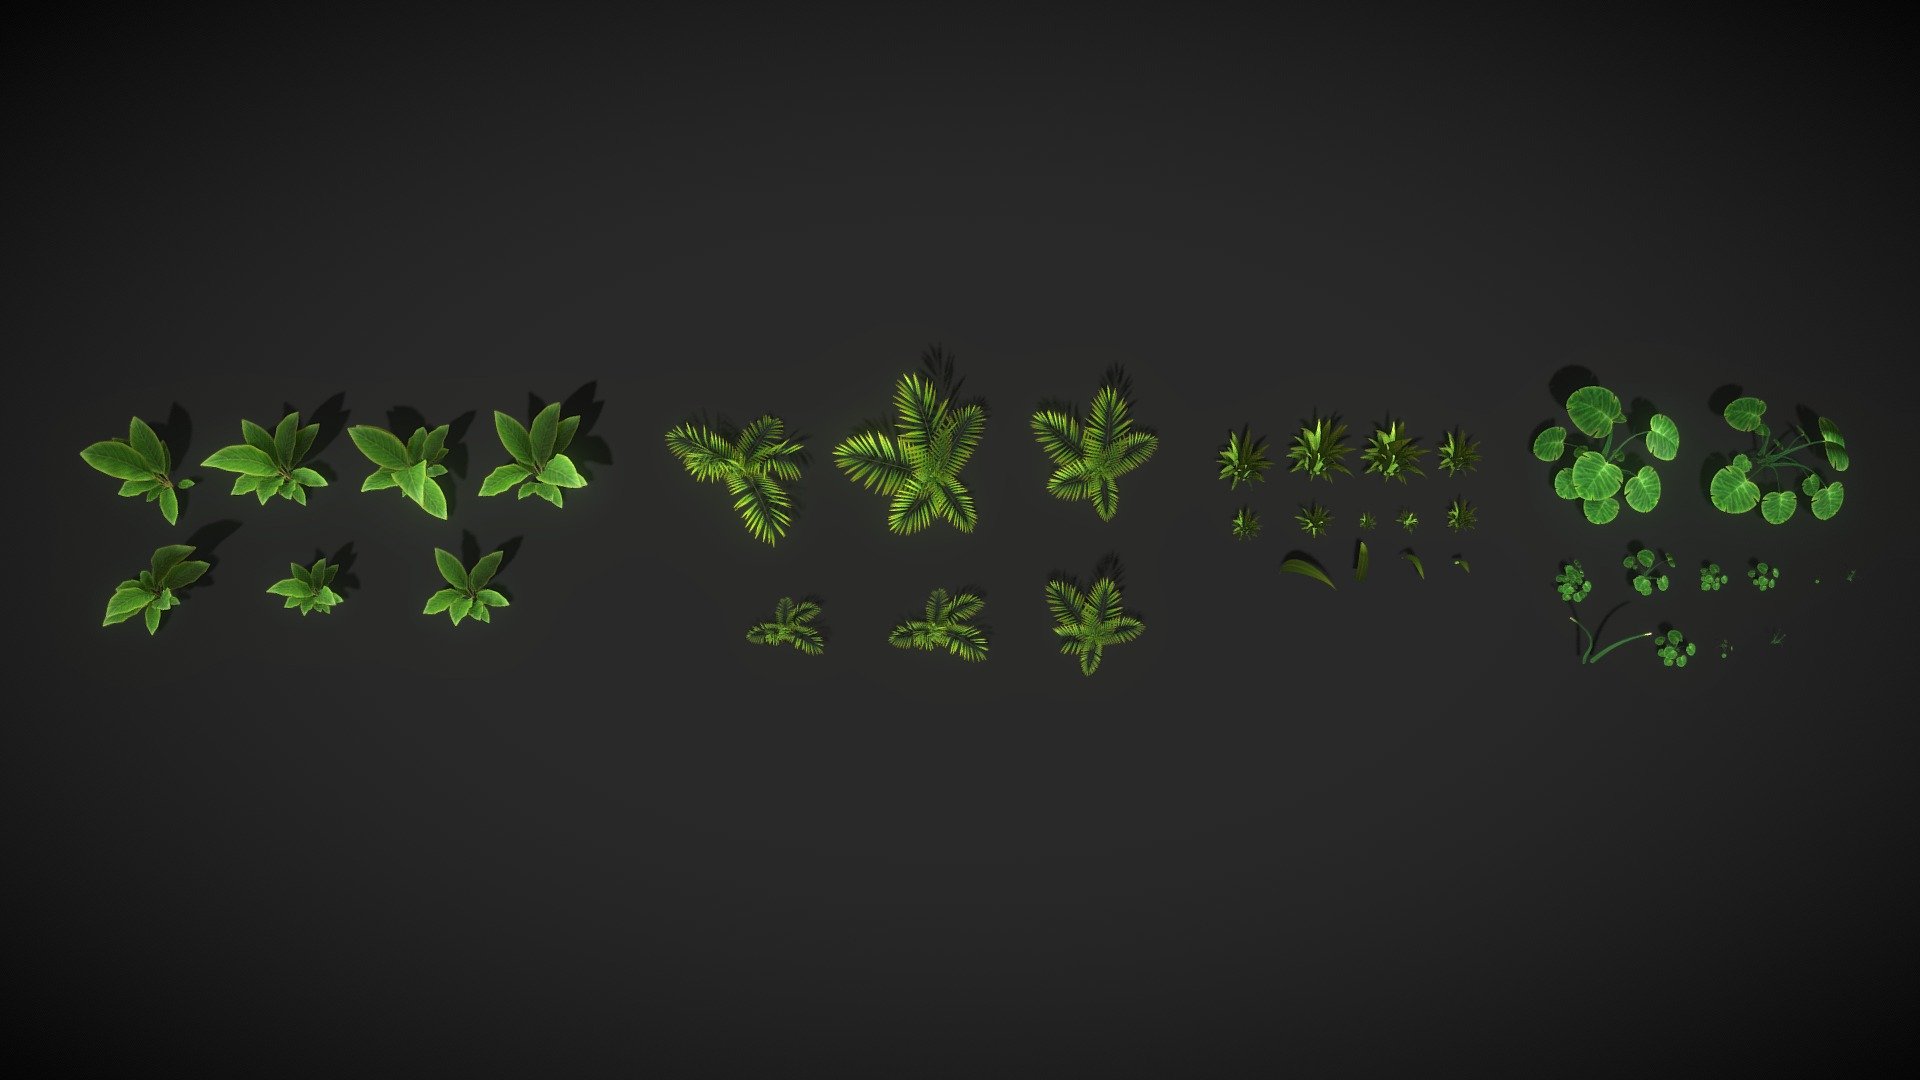 bush for using in game and animation for free
&hellip;
Follow me for more free Objects 3d model